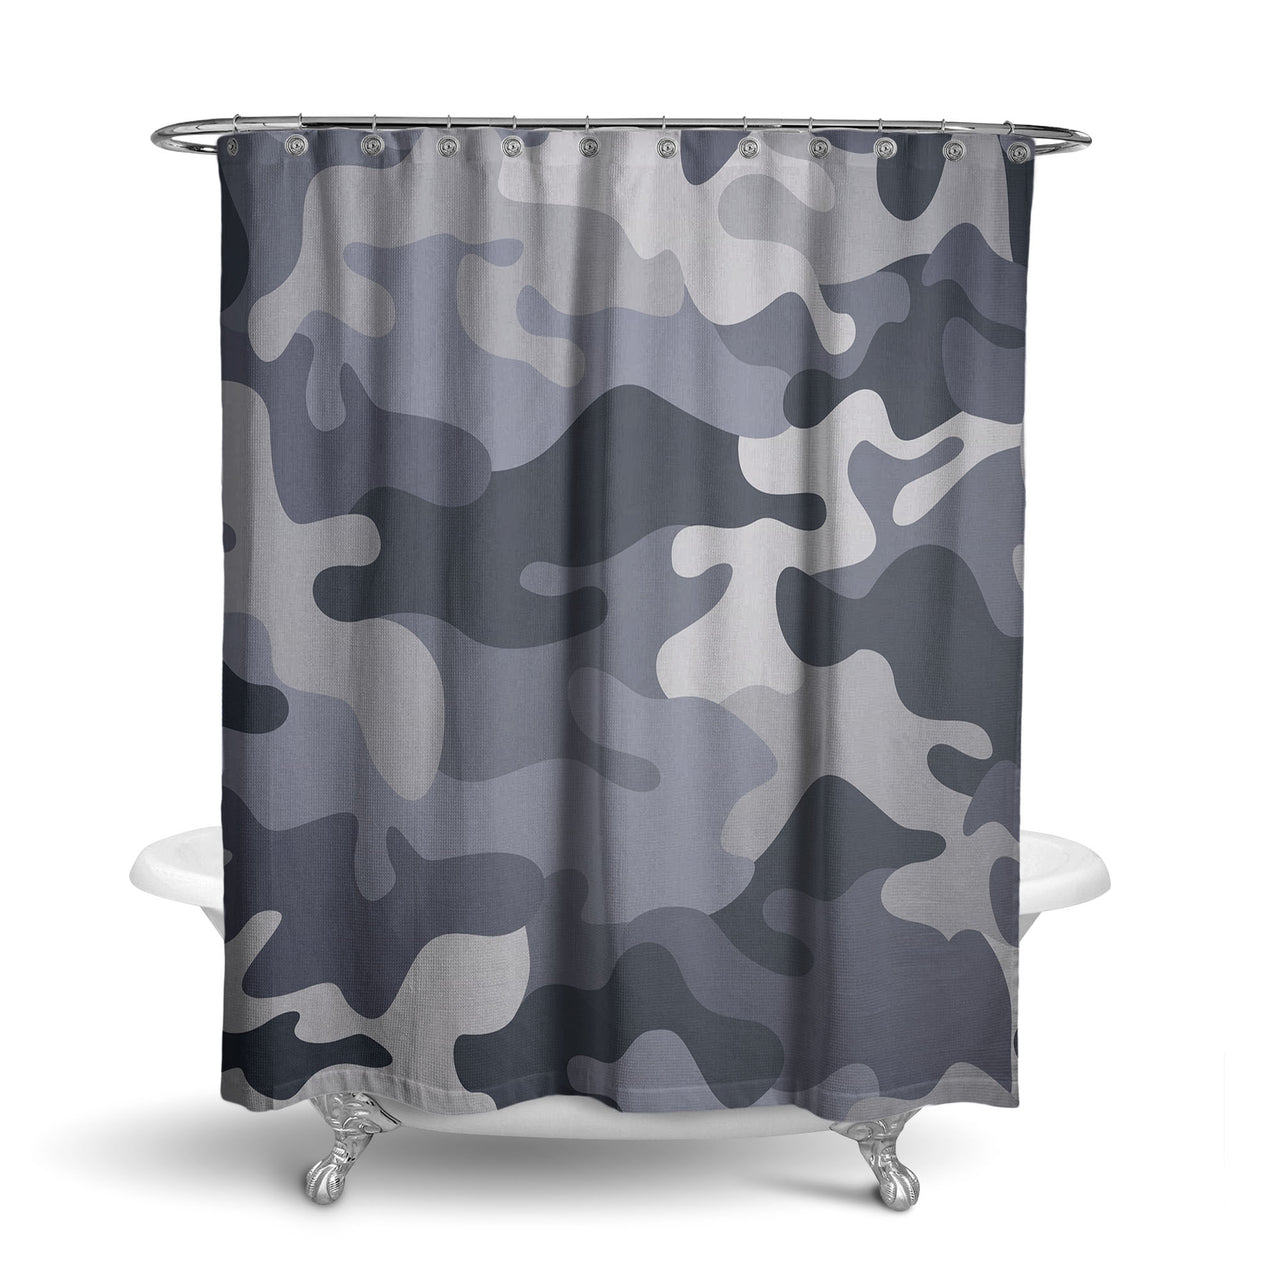 Military Camouflage Army Gray Designed Shower Curtains